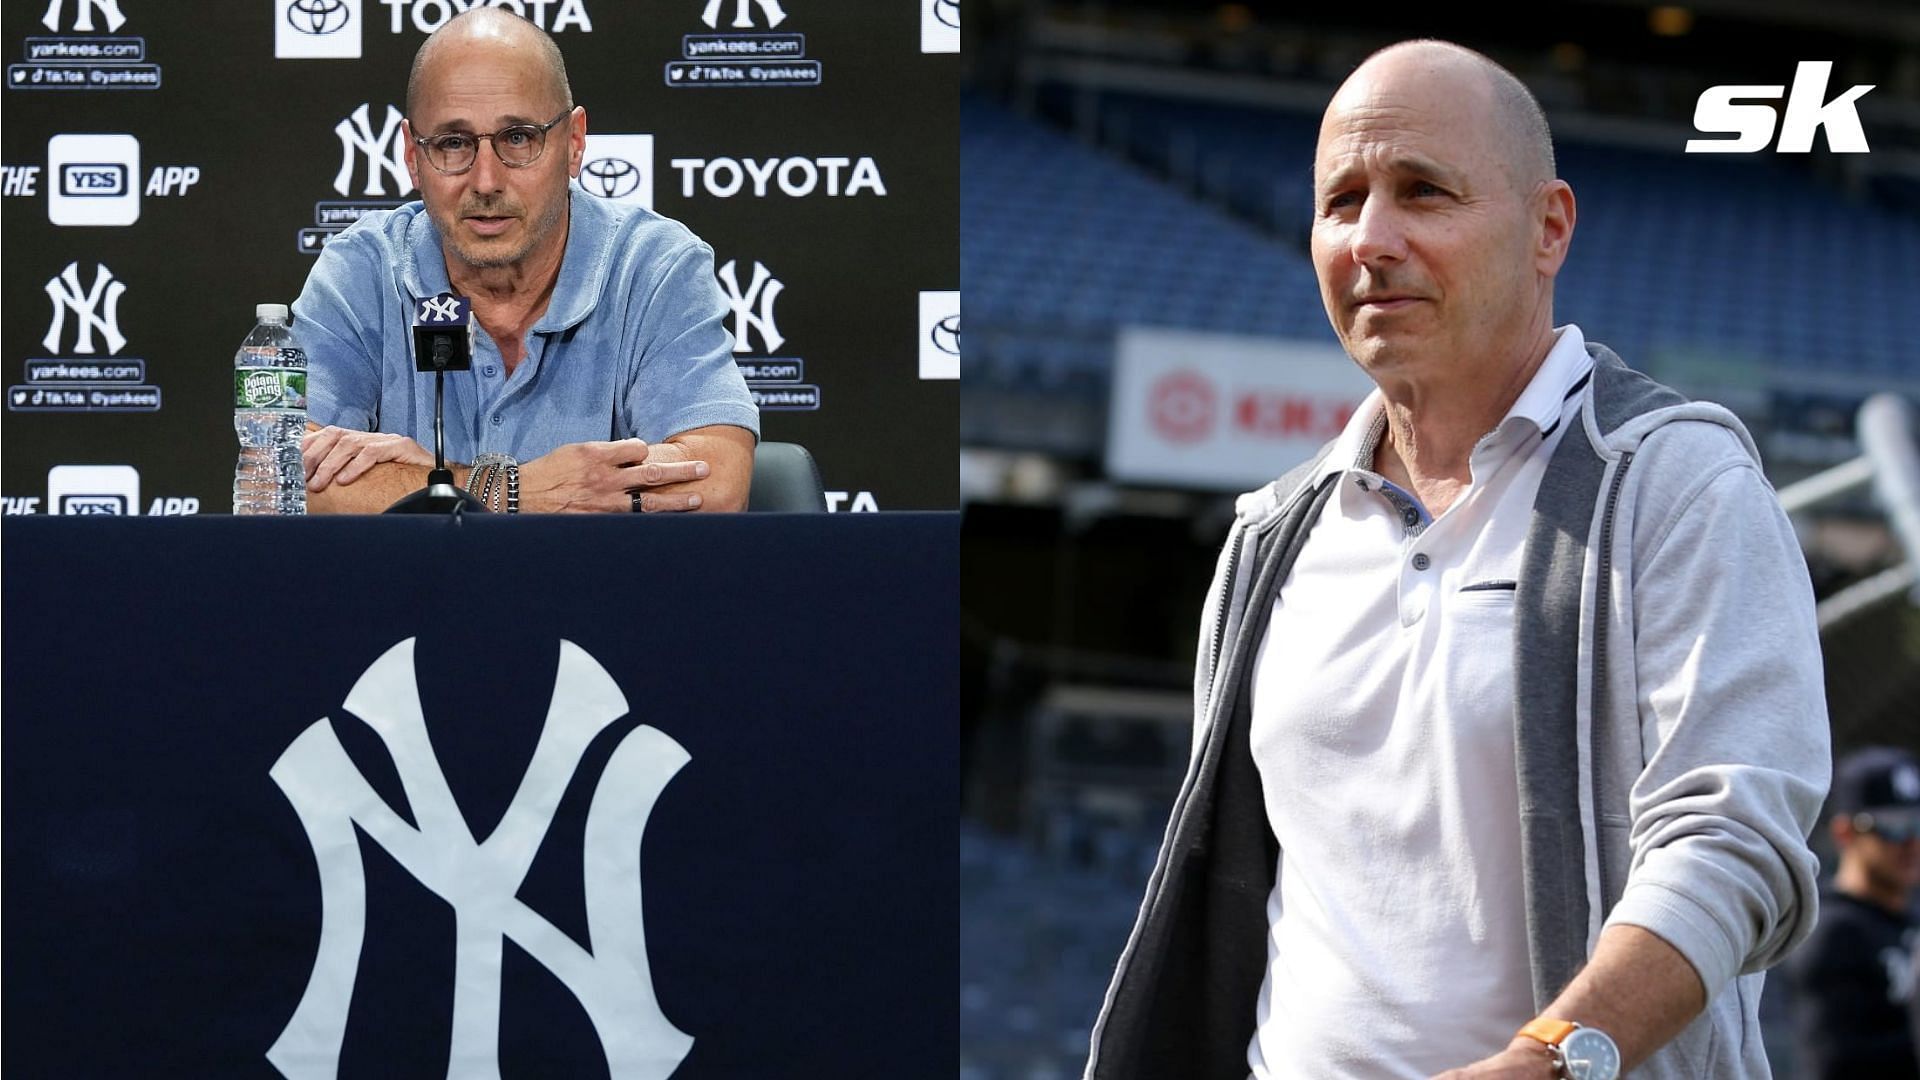 Yankees Gm Brian Cashman has drawn the ire of fans yet again after saying that he believes the current roster is really strong